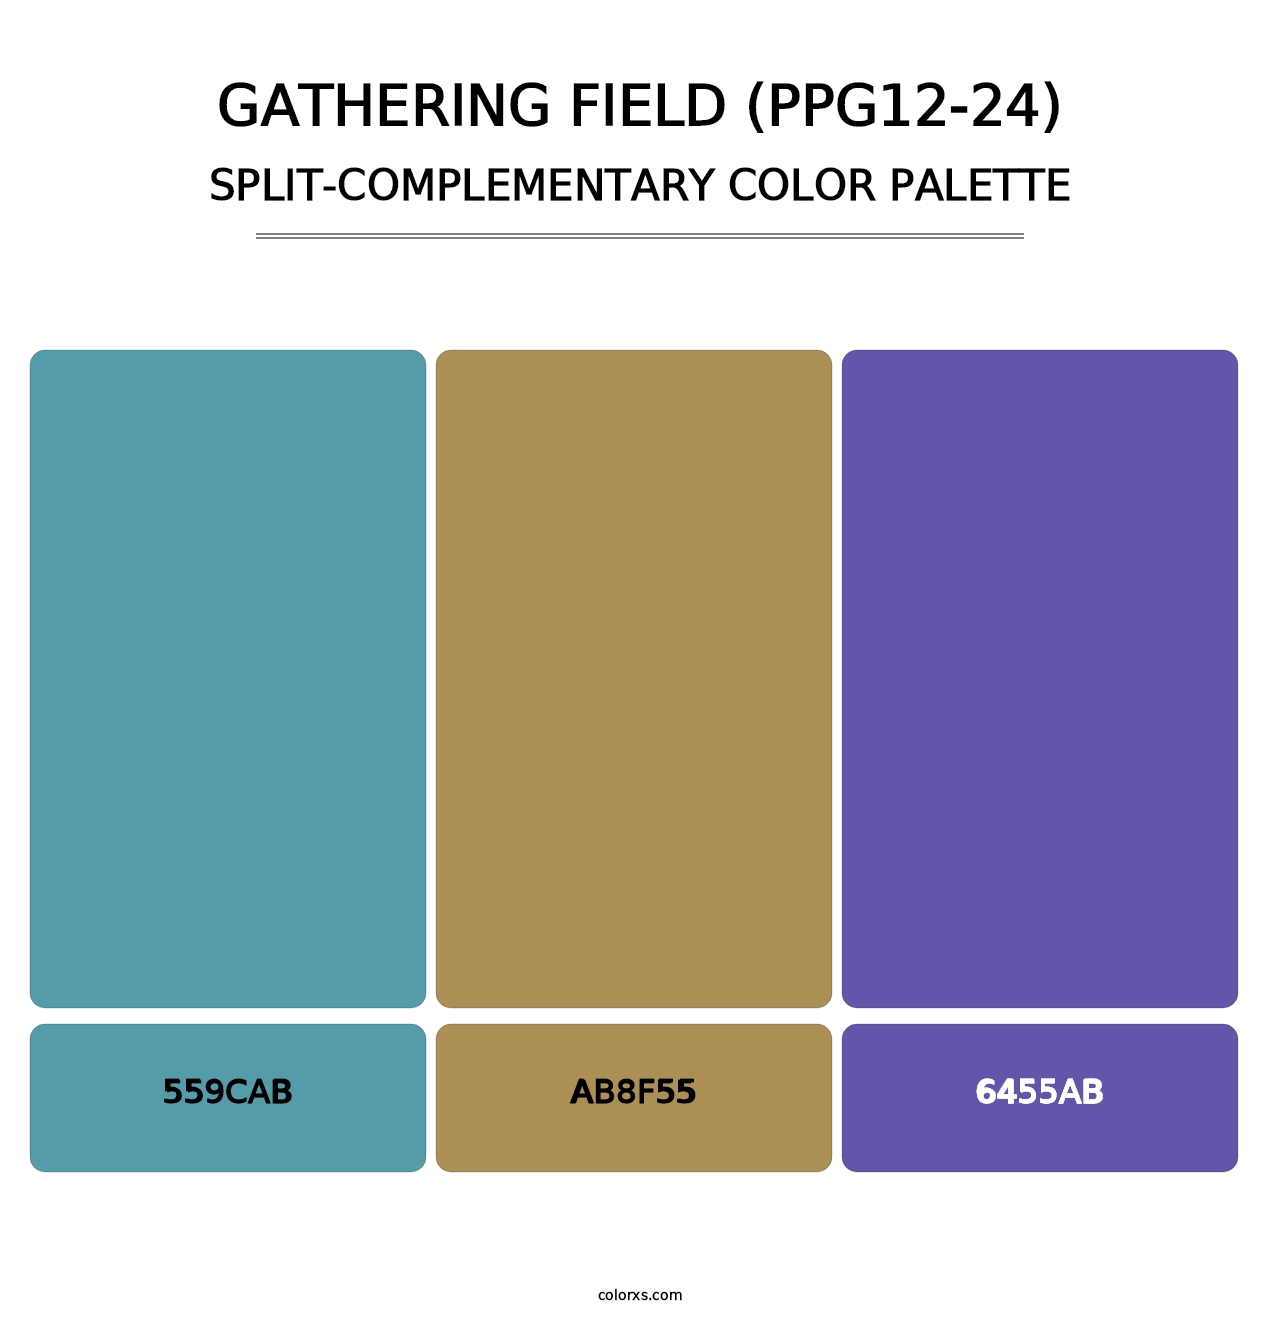 Gathering Field (PPG12-24) - Split-Complementary Color Palette